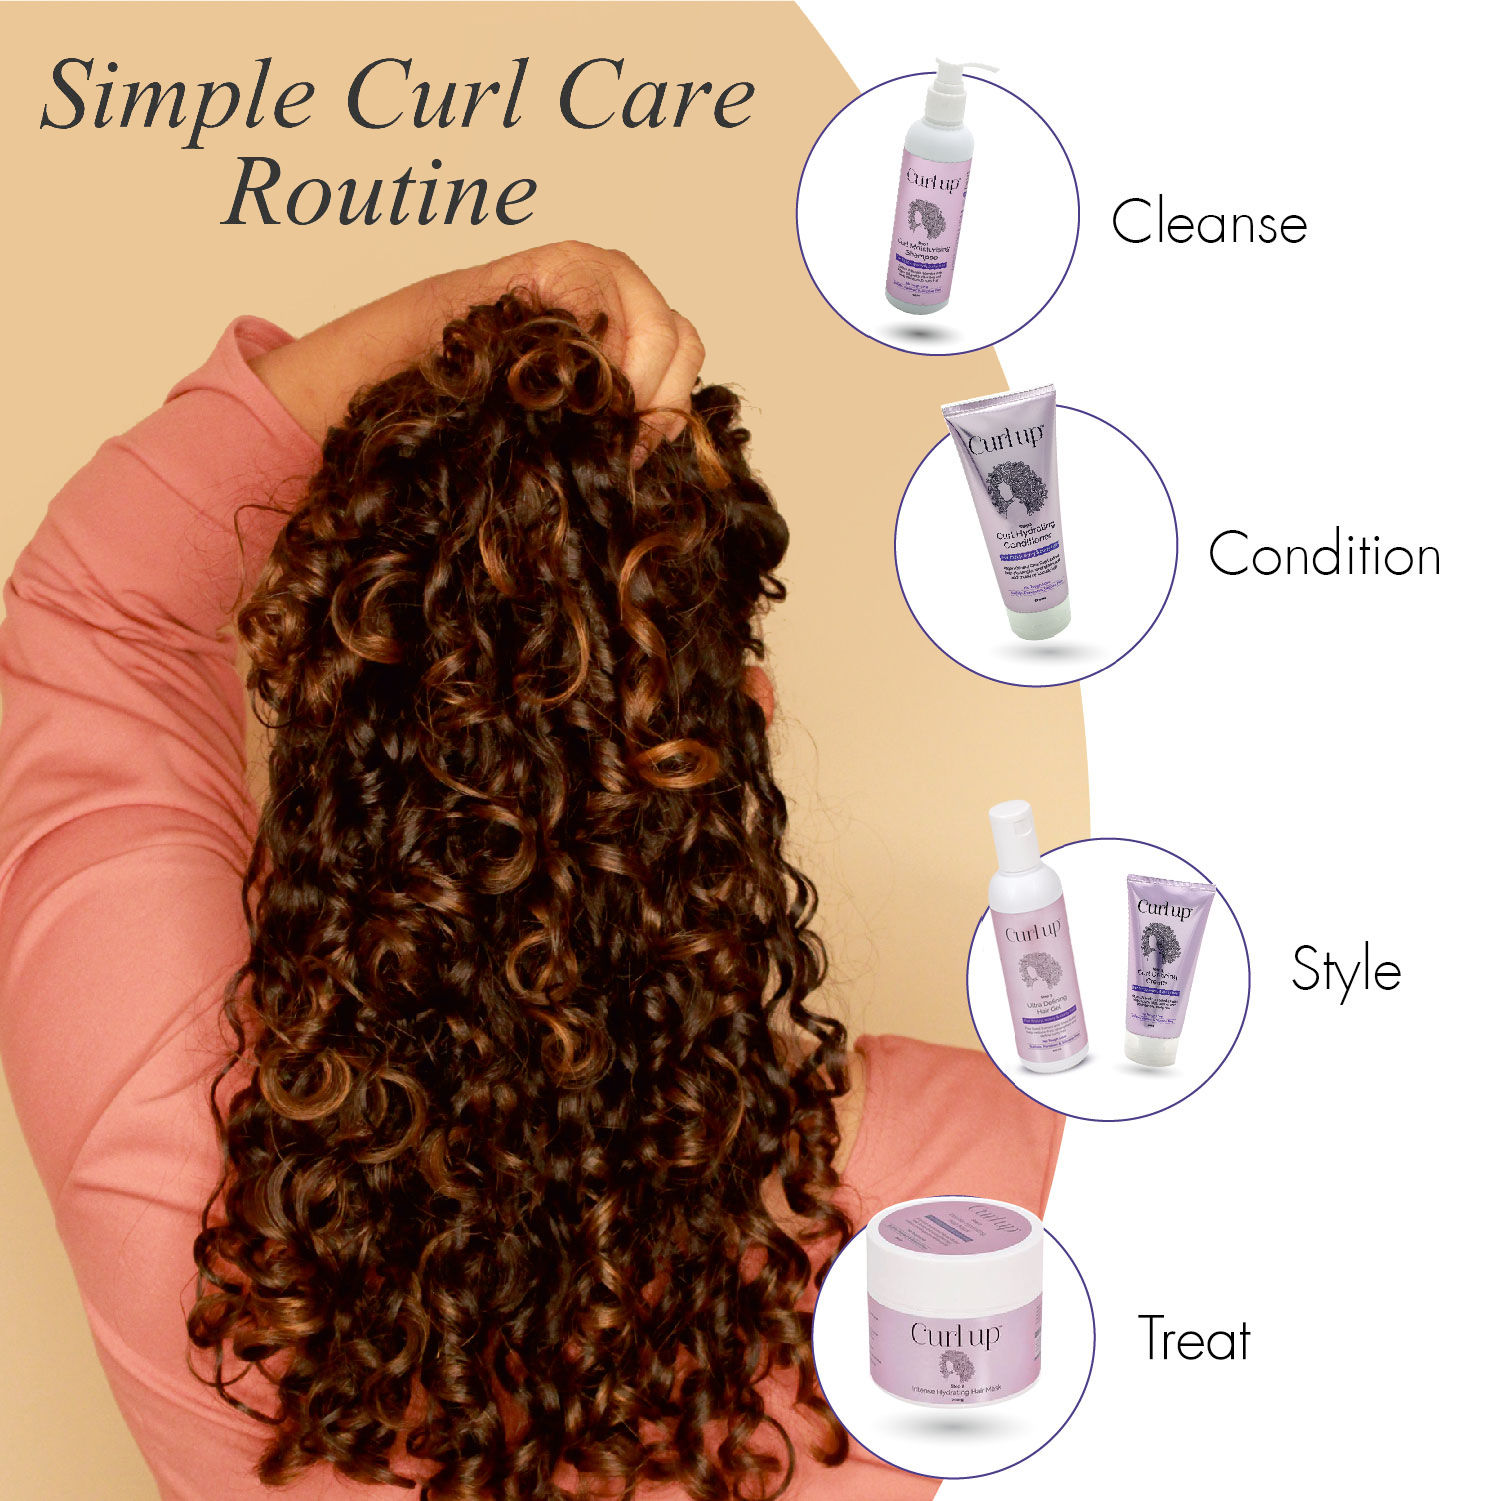 26 Best Curly Hair Products According to Women With Different Curl Patterns   Teen Vogue